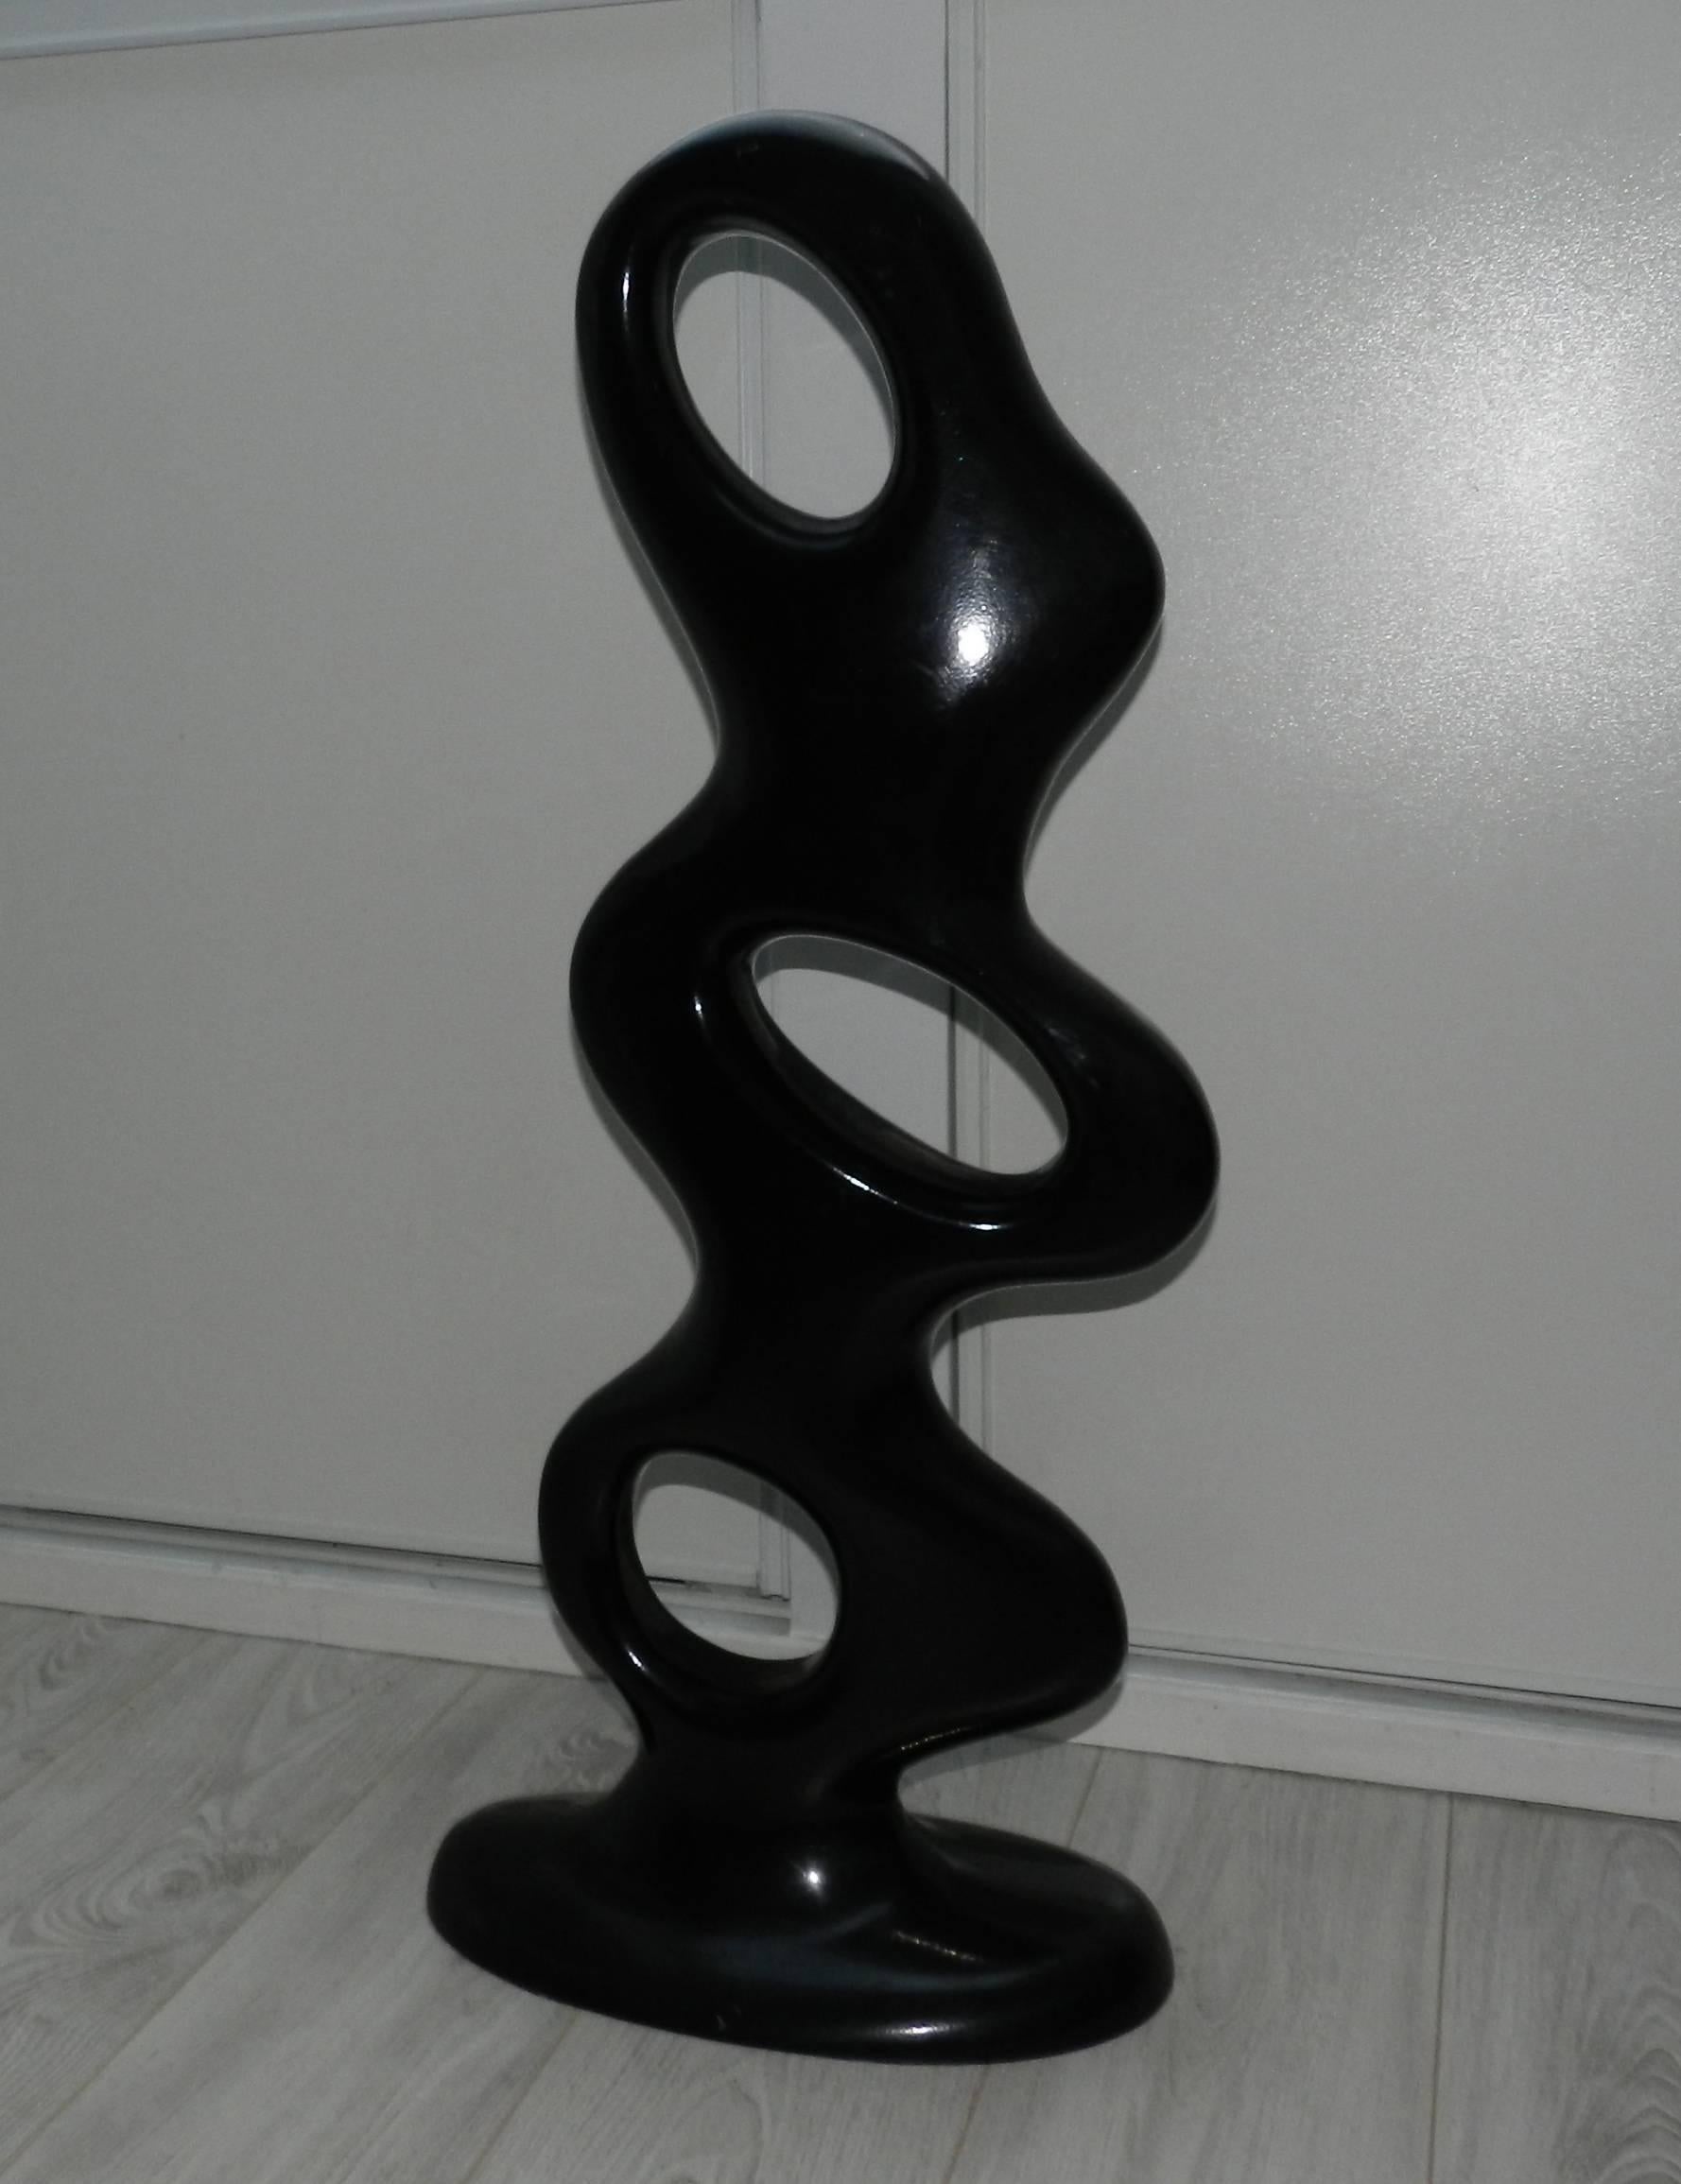 Decorative piece of art, circa 1970 lacquered metal.
Missing some painting on the base.